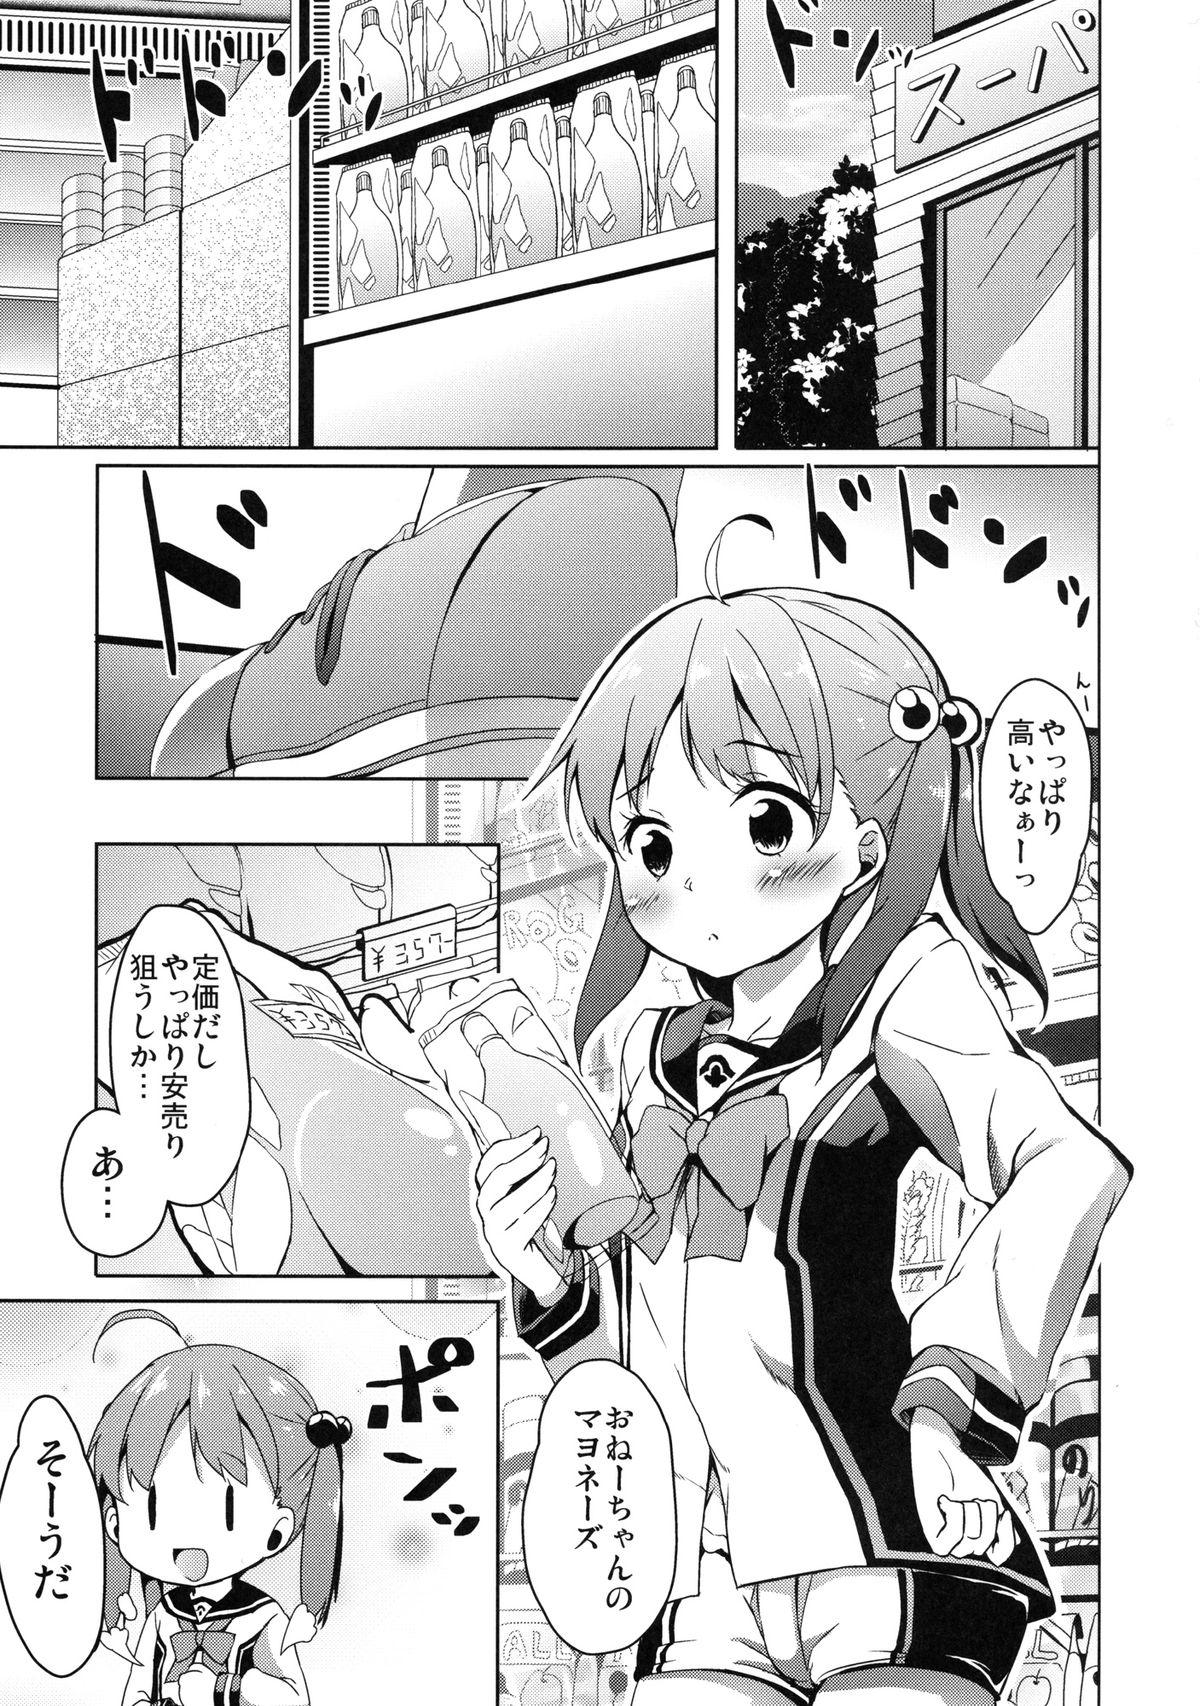 18 Year Old Momotto Motto Operation - Vividred operation Real Amateur - Page 5